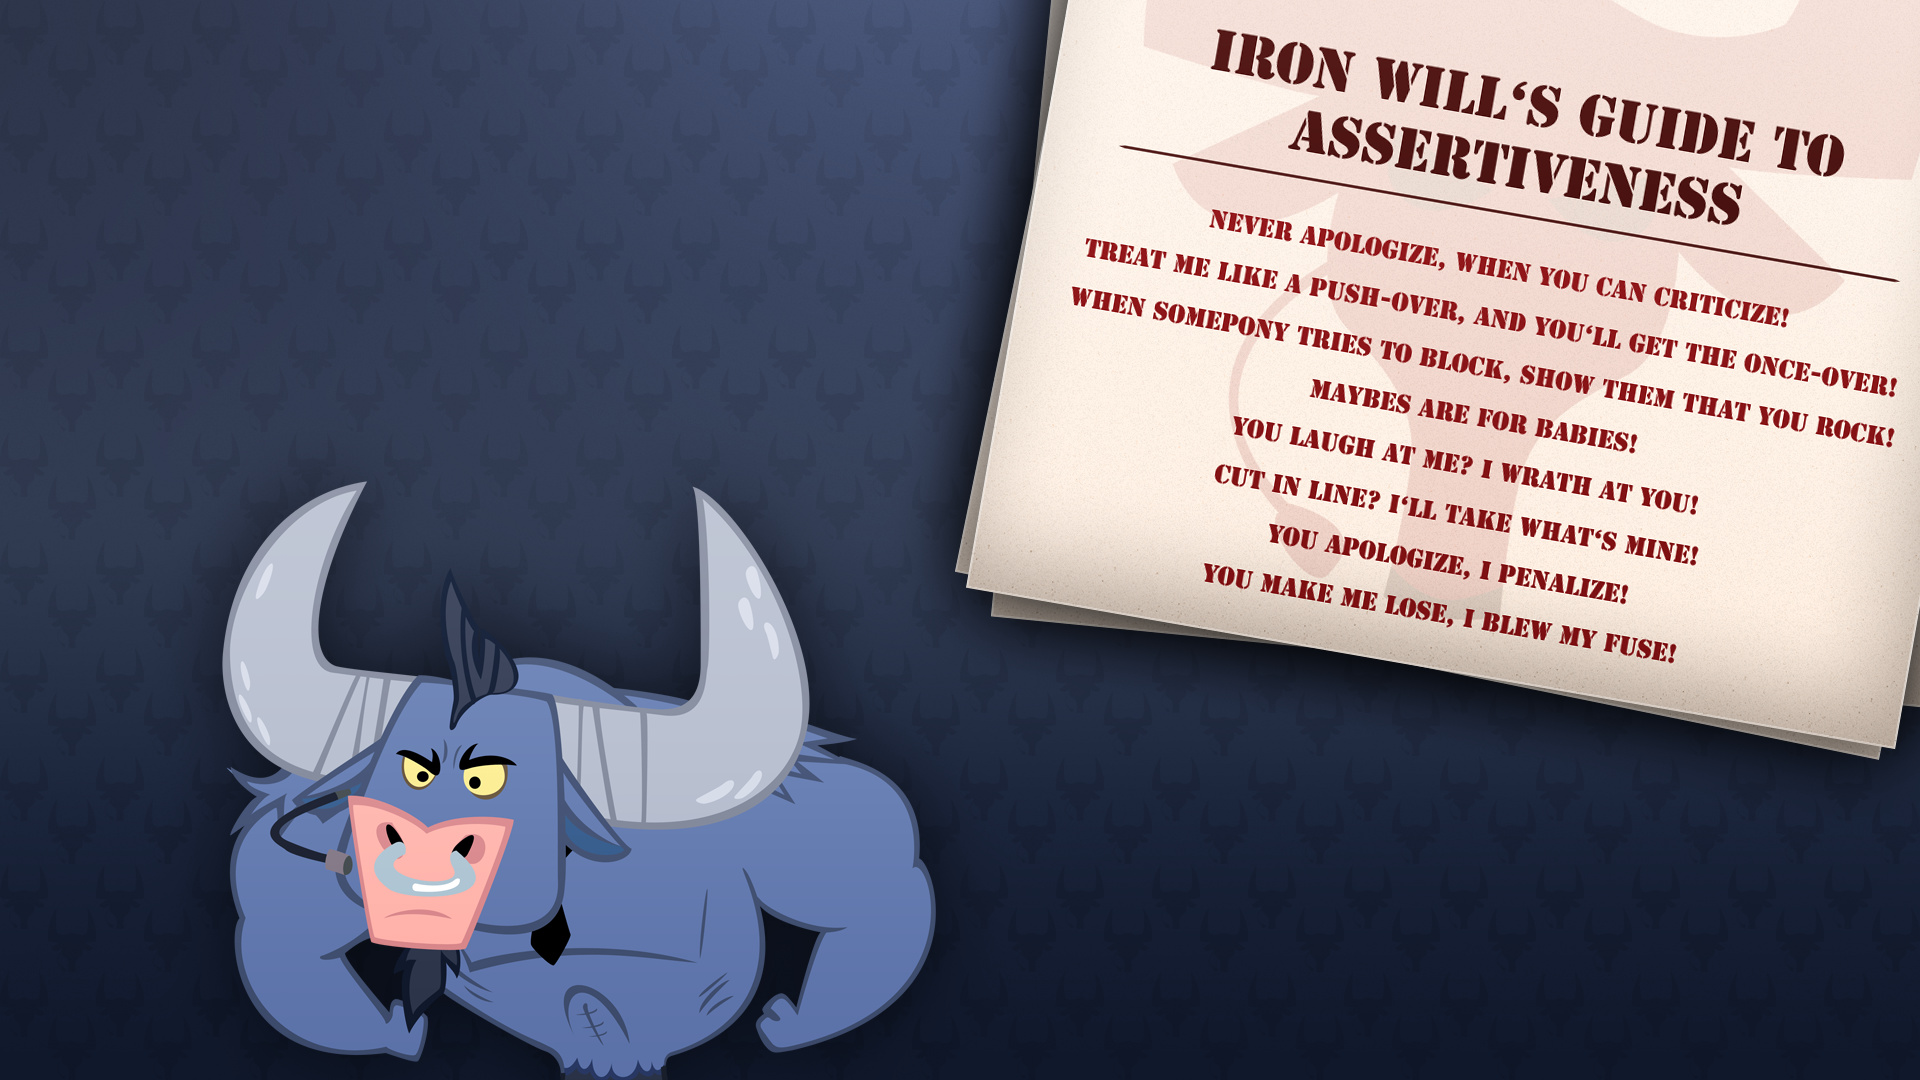 Iron Will Assertiveness Guide Wallpaper by Bardiel83, Kyute-Kitsune and TheAmazingNoodle